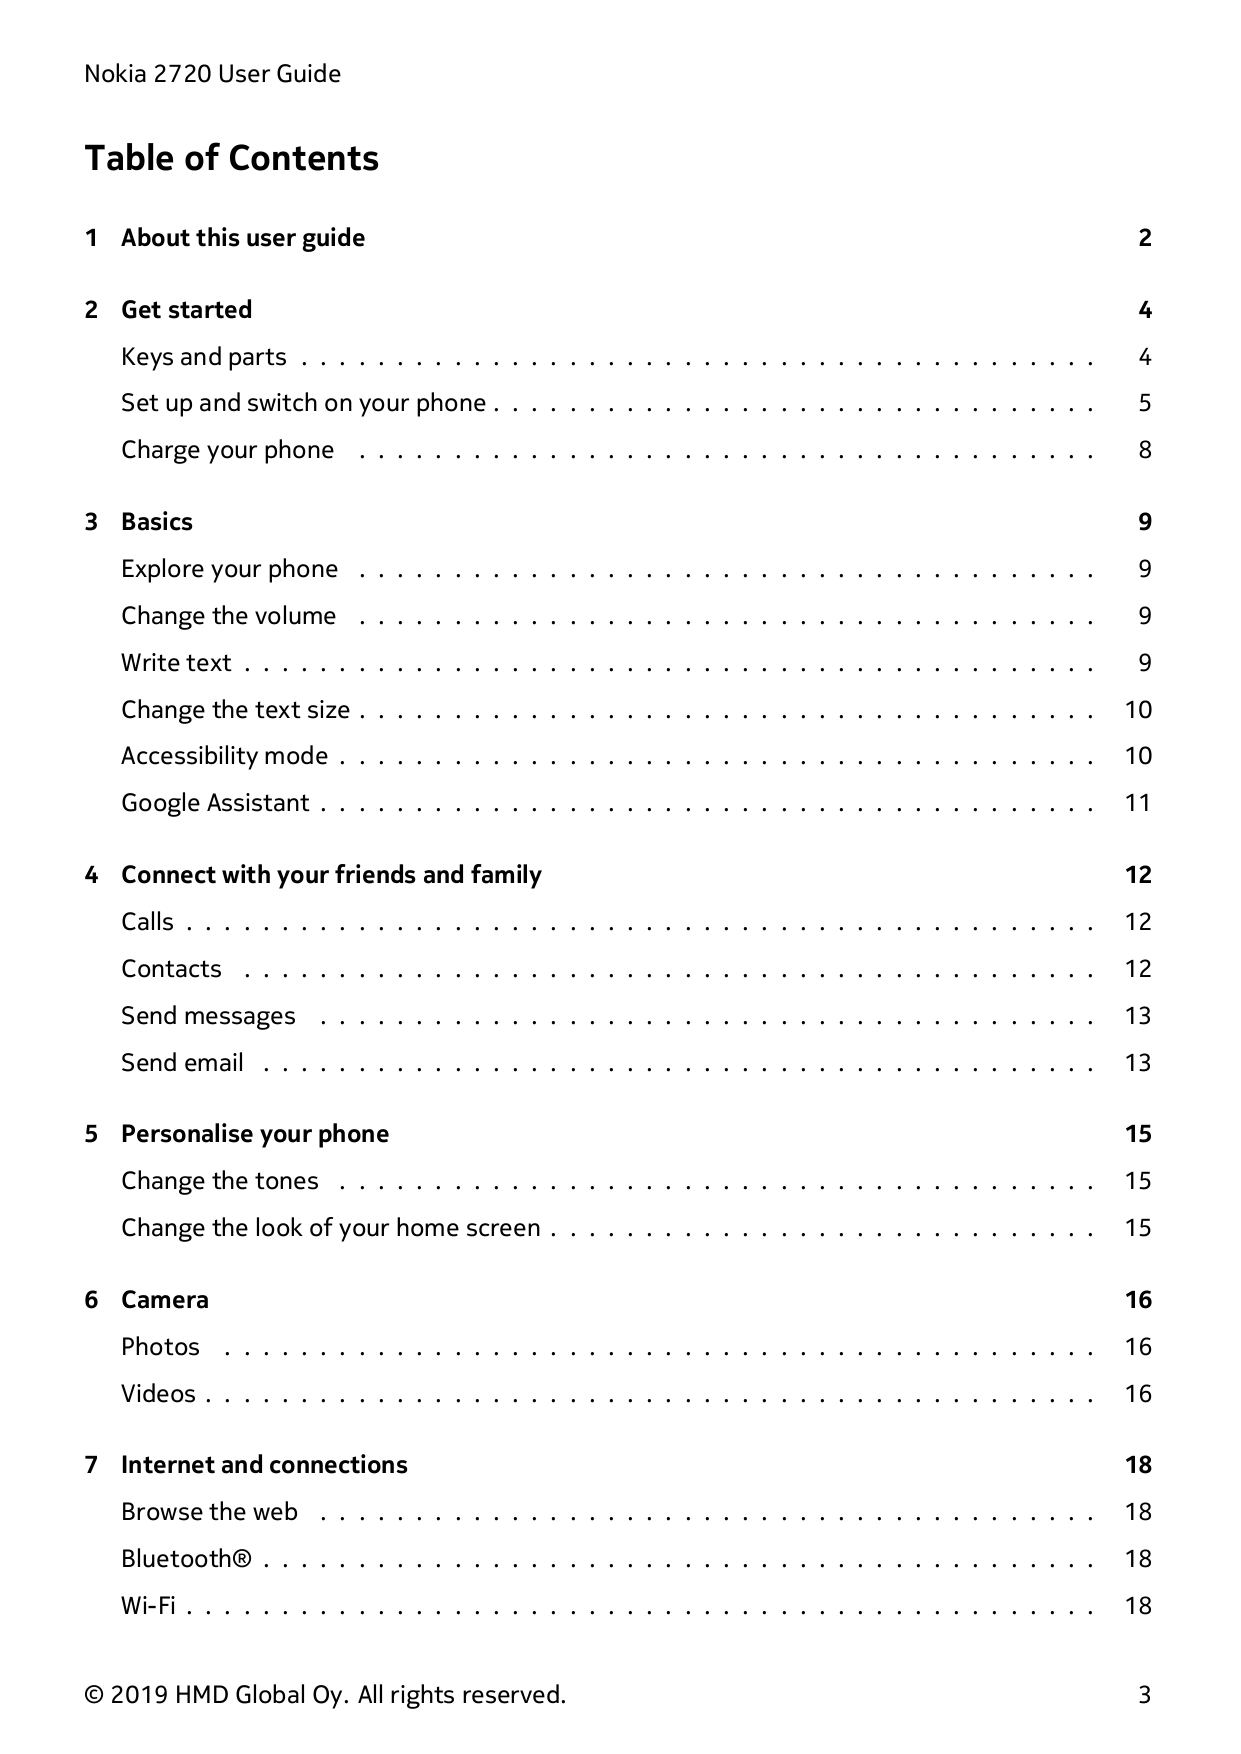 Nokia 2720 User GuideTable of Contents1 About this user guide22 Get started4Keys and parts . . . . . . . . . . . . . . . . . . .